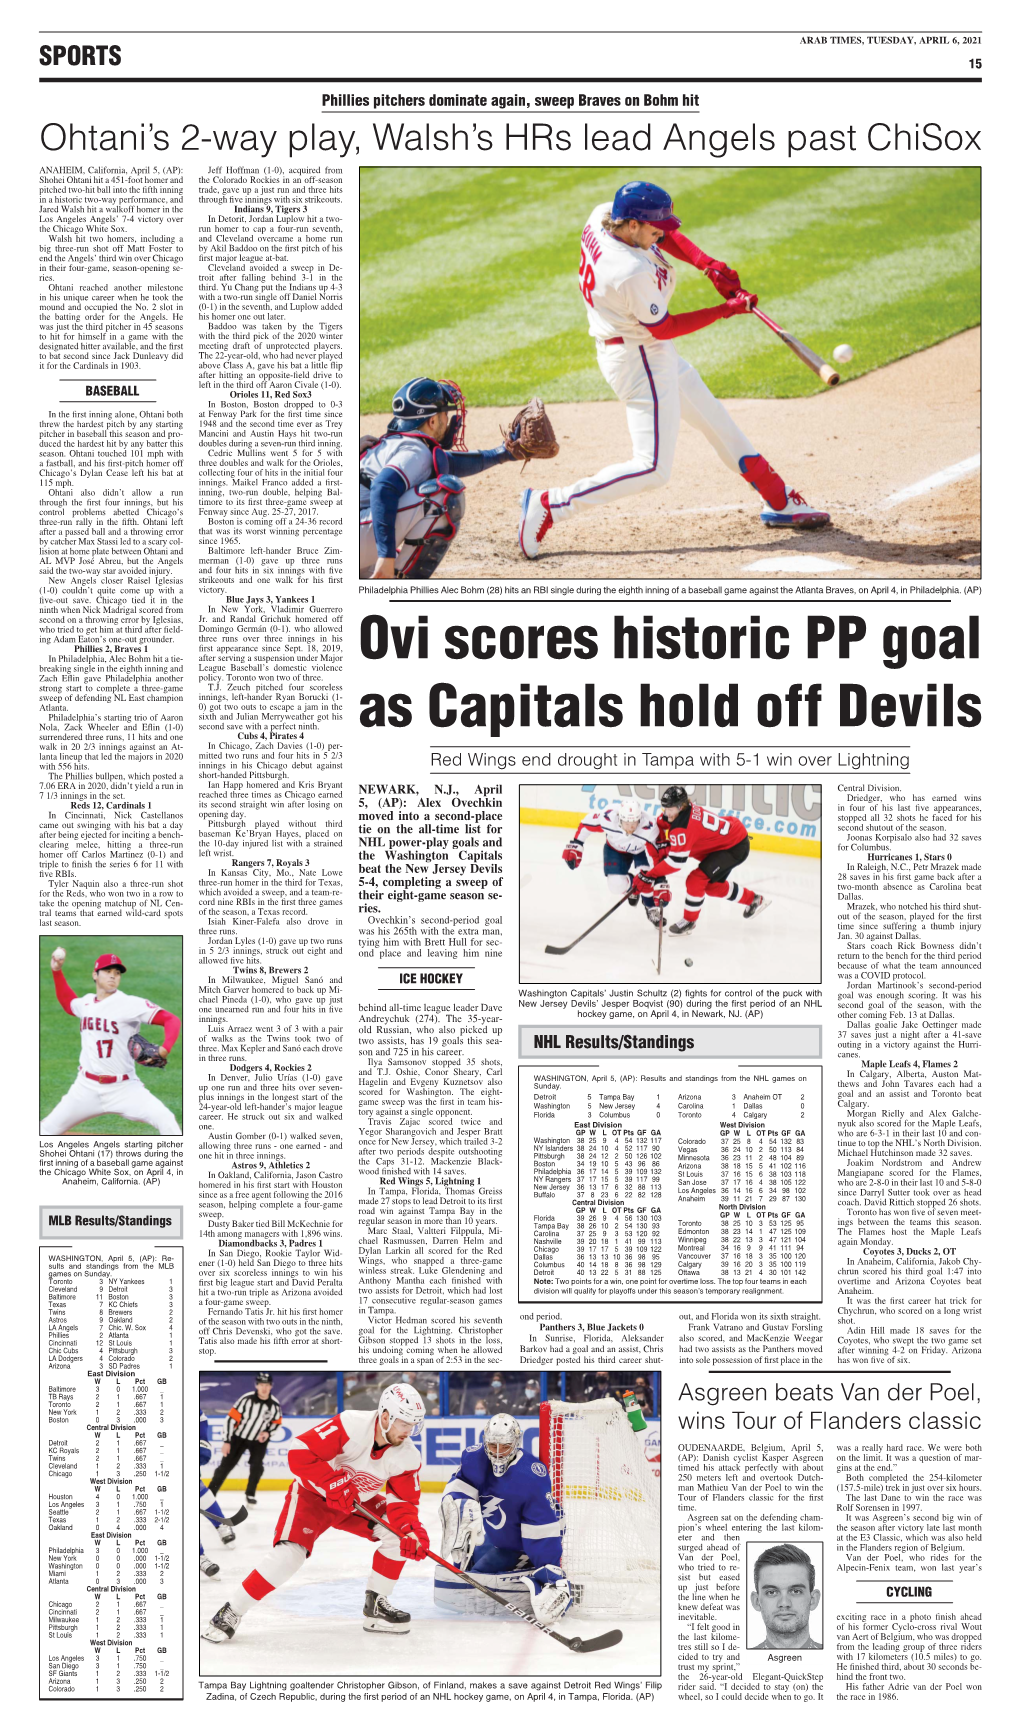 Ovi Scores Historic PP Goal As Capitals Hold Off Devils